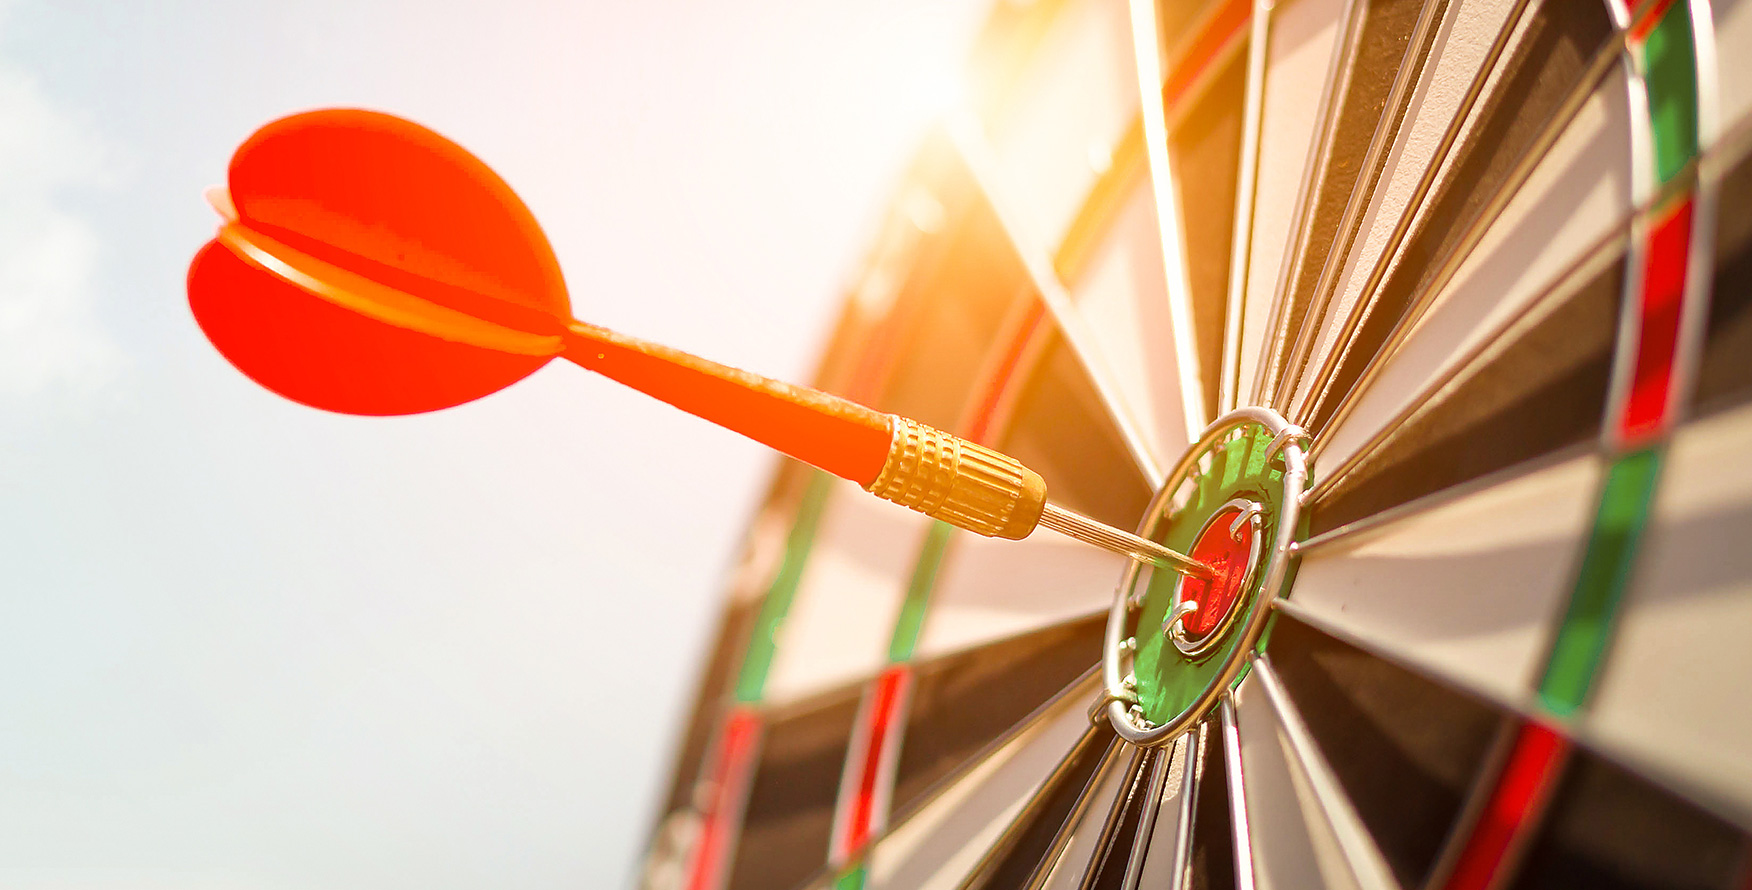 Dart arrow hitting a target in the center of a dartboard.